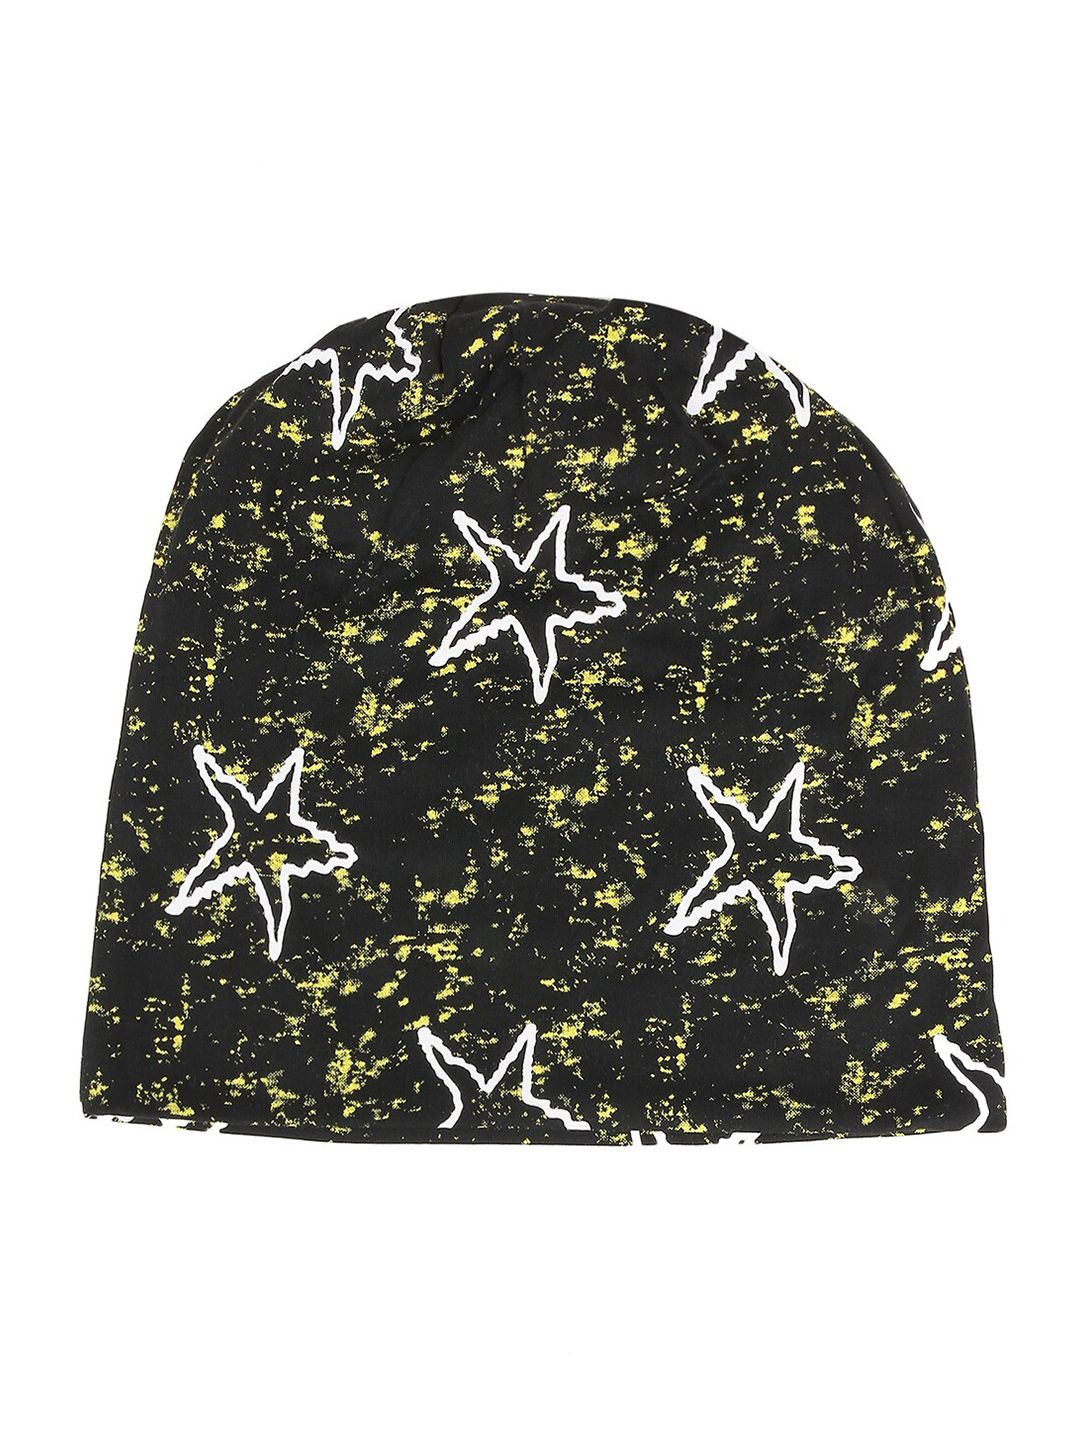 iSWEVEN Unisex Black & White Printed Cotton Beanie Price in India